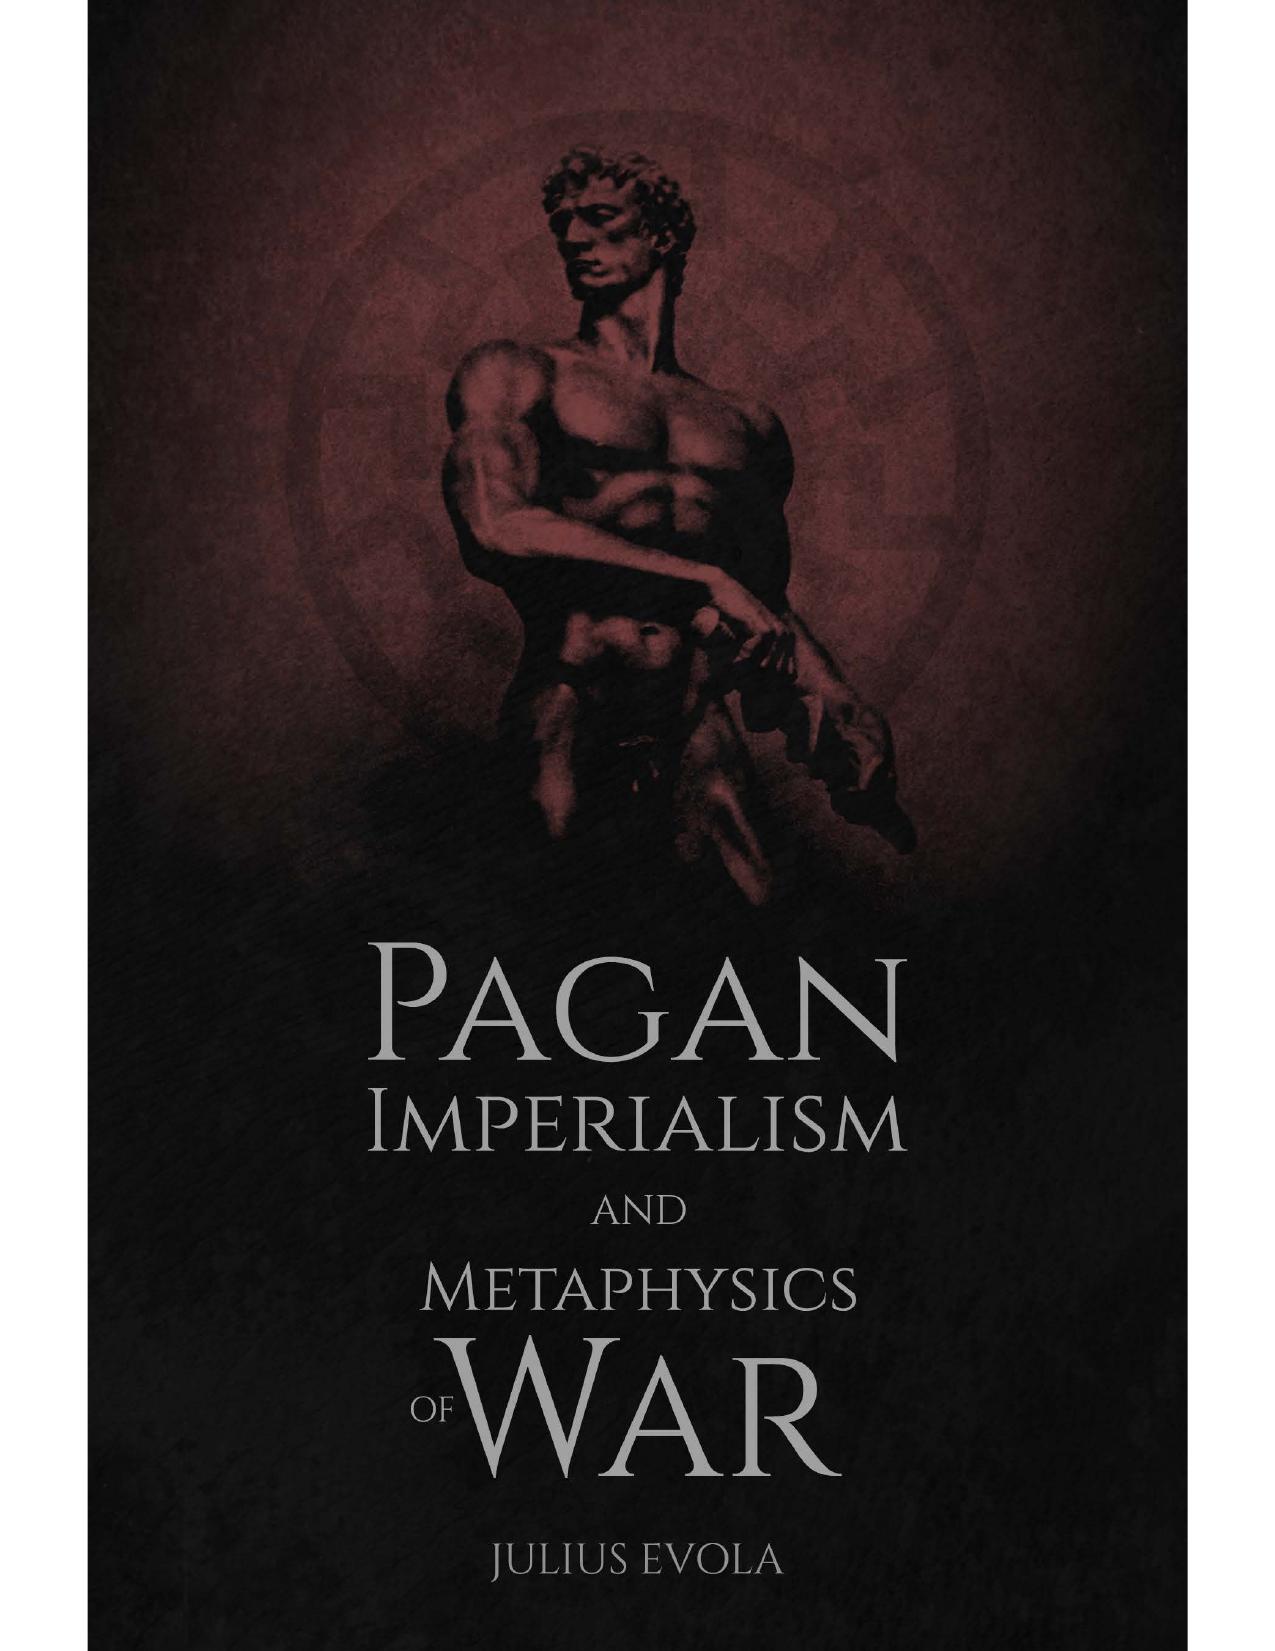 Pagan Imperialism and Metaphysics of War by Julius Evola (Wewelsburg Archives Edition).pdf by Julius Evola